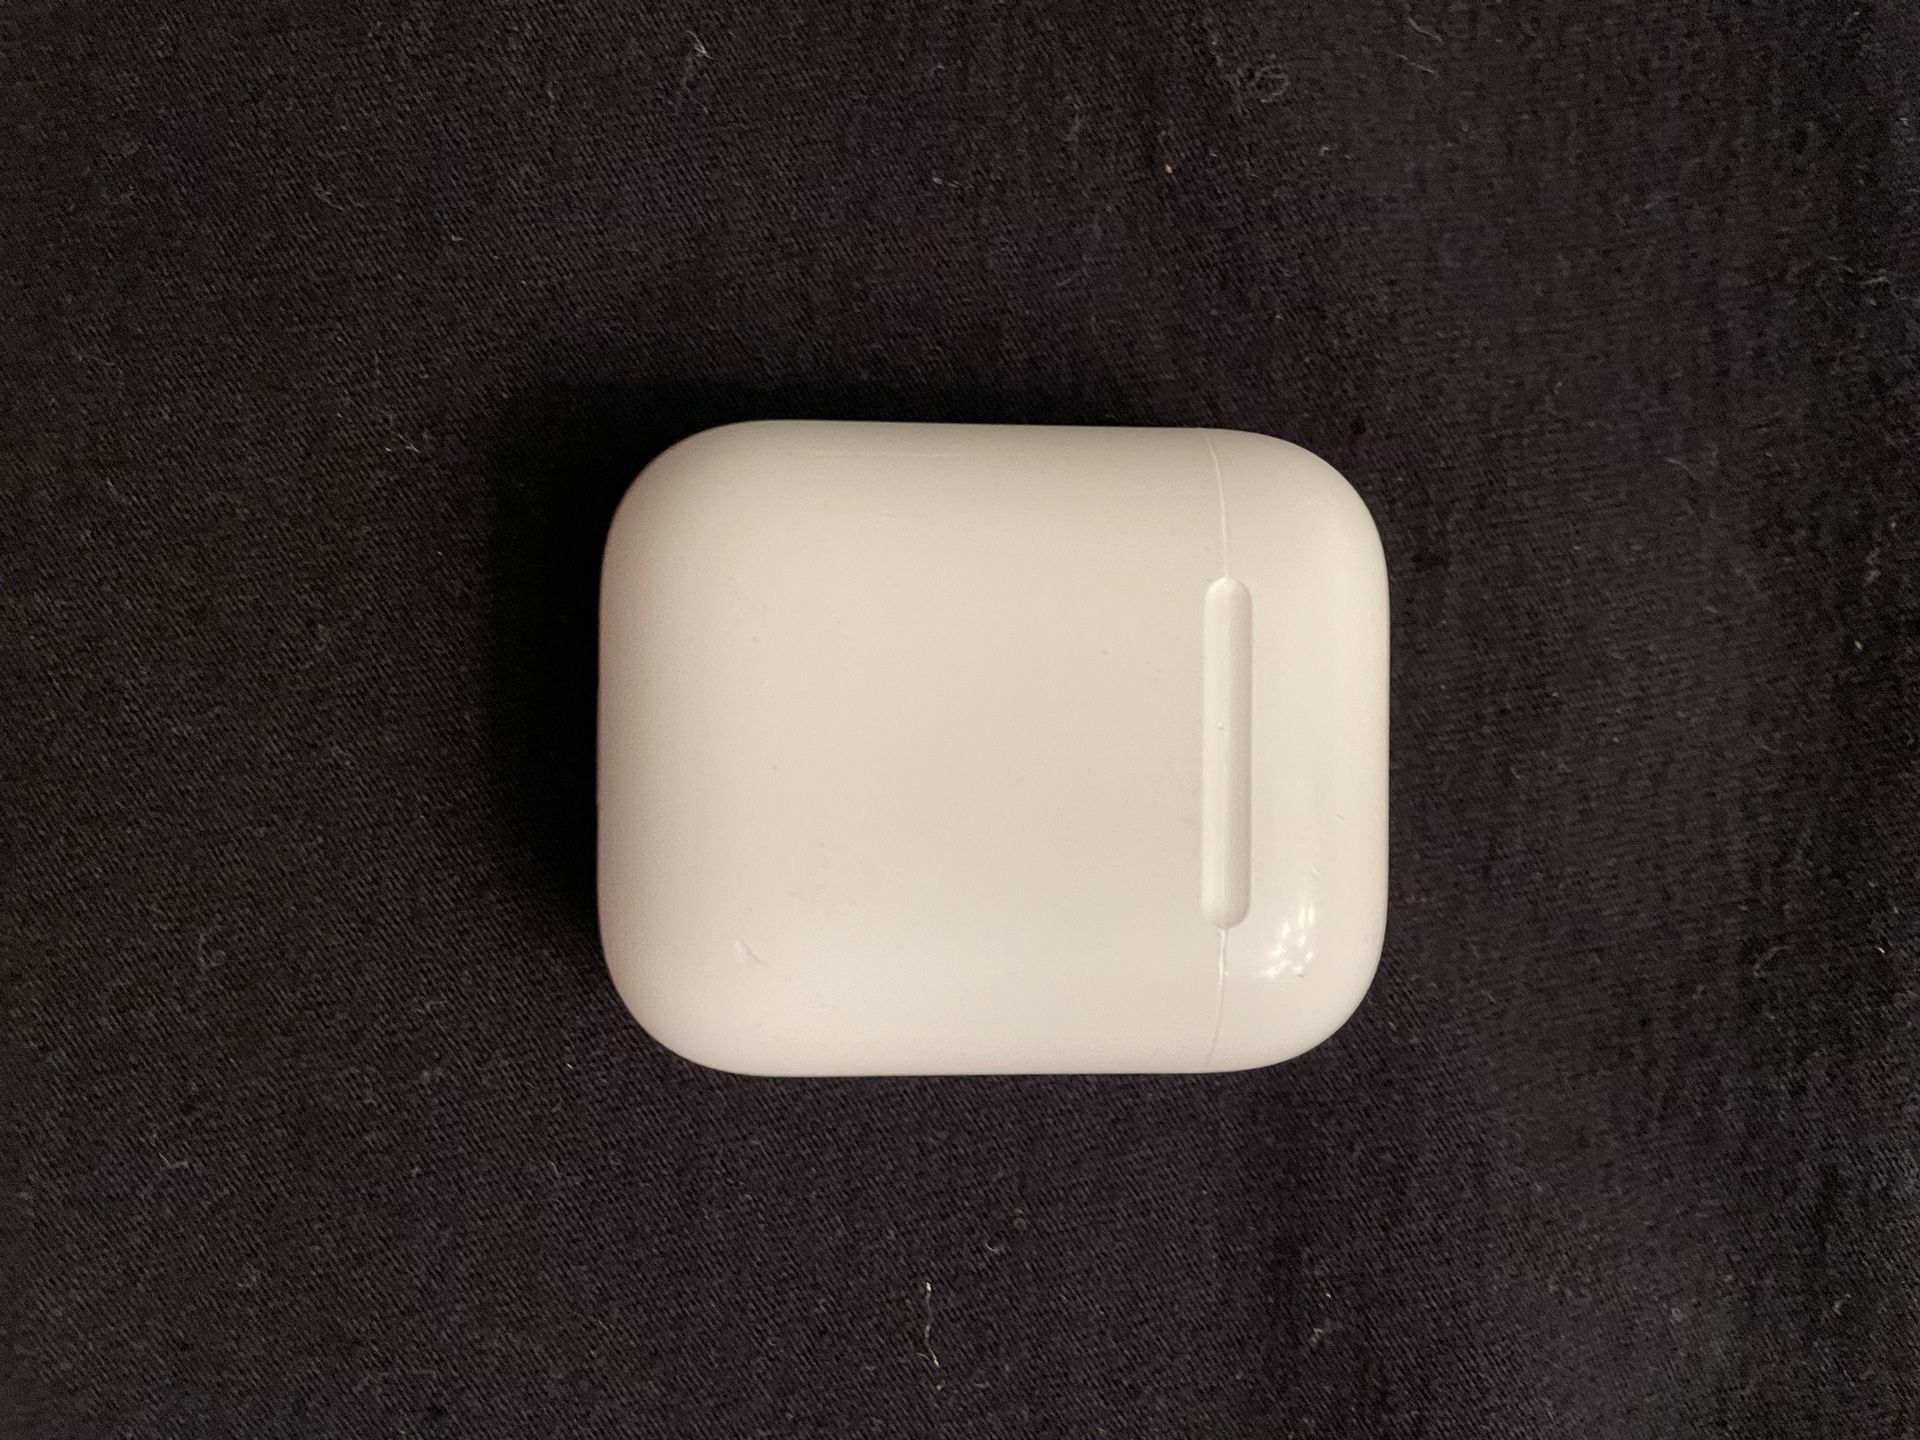 AirPods 2nd Generation With Charging Case